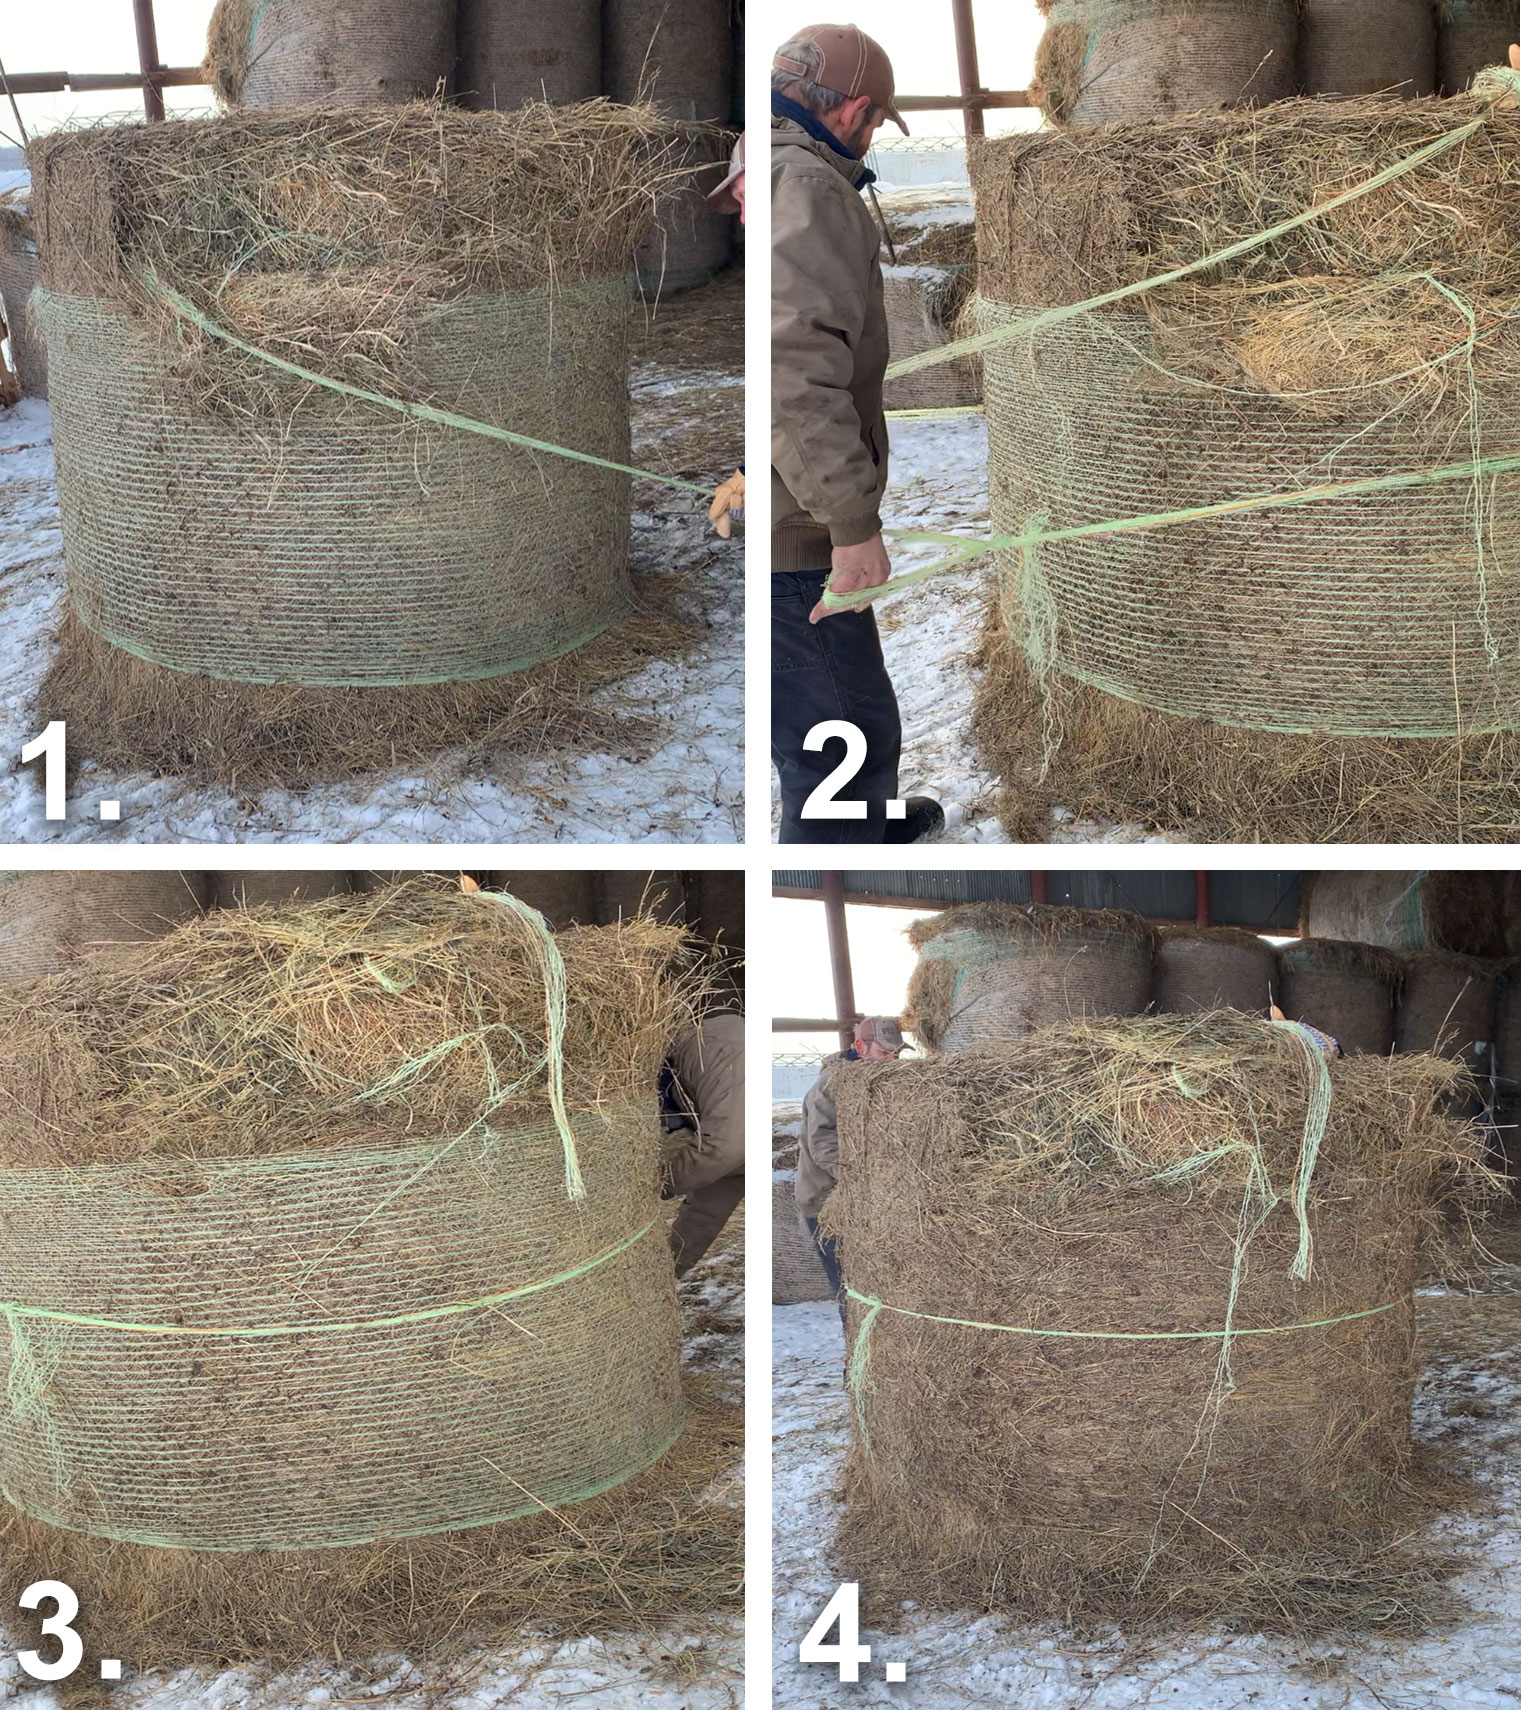 Four sequential photos illustrating the steps for net wrap removal. The first photo shows a male producer removing the top one-third of net wrapping from a bale. The second shows him wrapping the net wrap around the body to make a loop knot. The third shows him taking the rest of the wrap off the bale. The fourth shows the remaining net wrap removed.